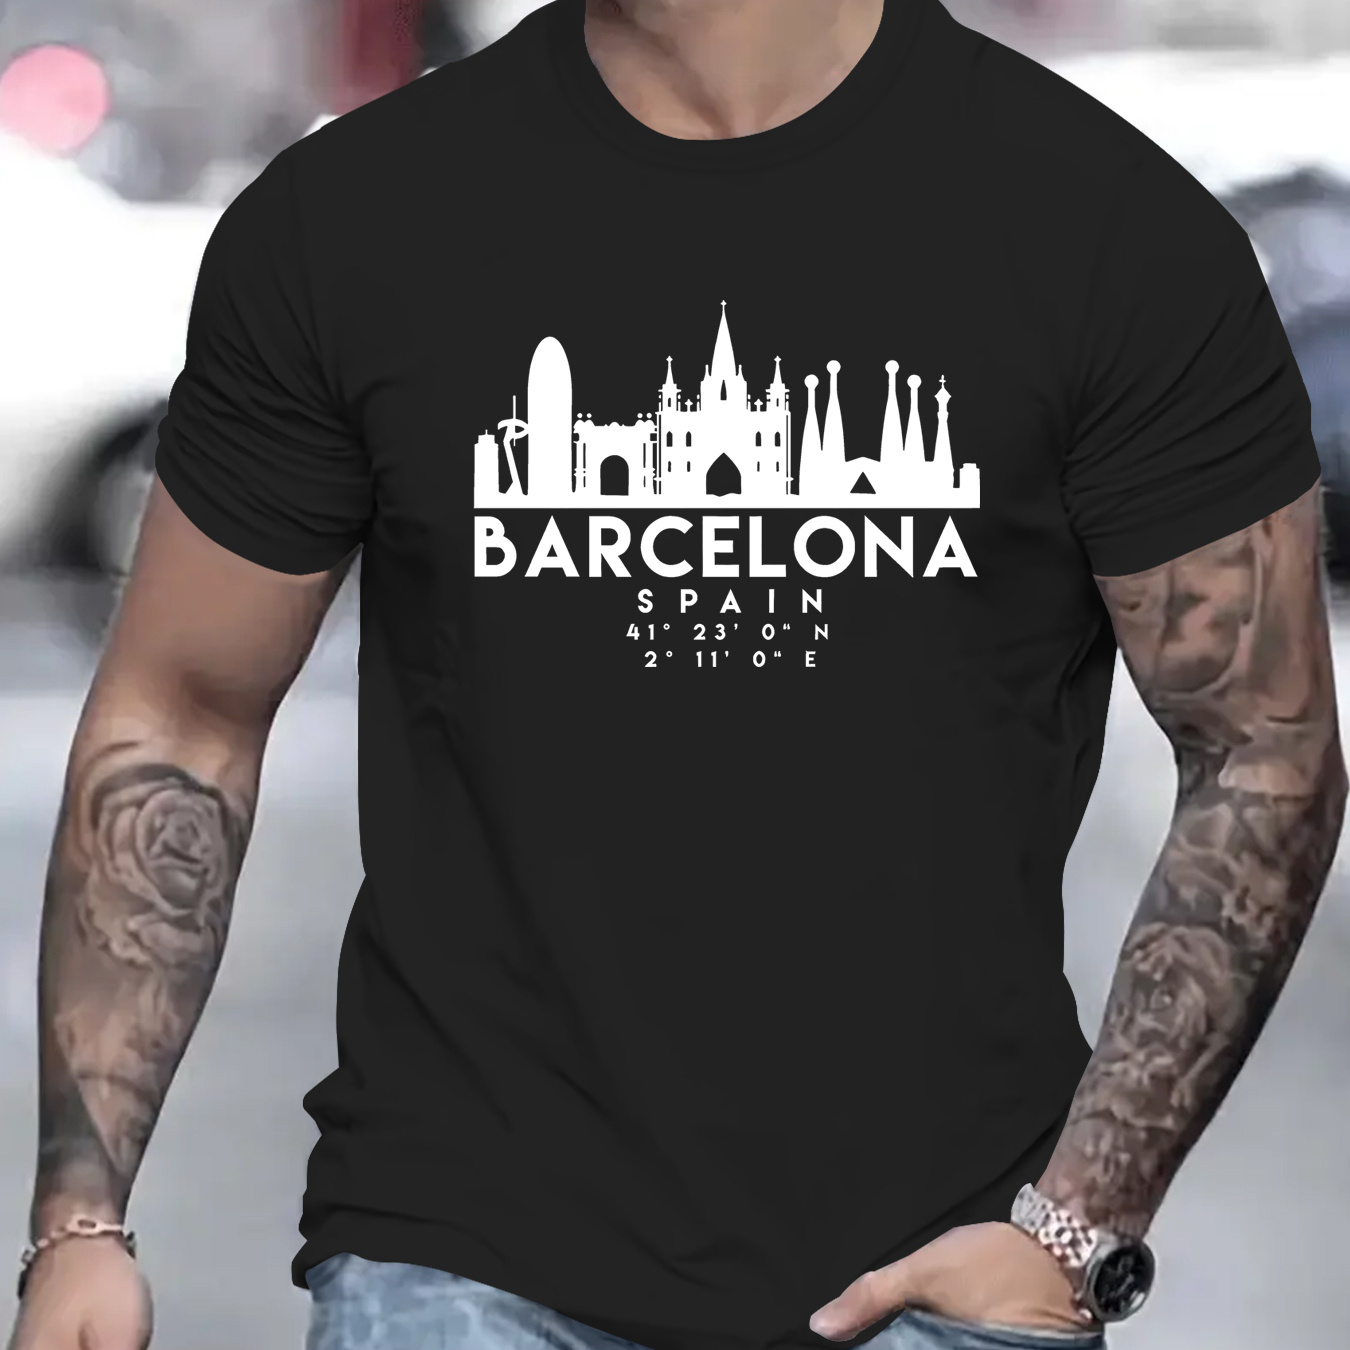 

Barcelona" Stylish Print Summer & Spring Tee For Men, Casual Short Sleeve Fashion Style T-shirt, Sporty New Arrival Novelty Top For Leisure